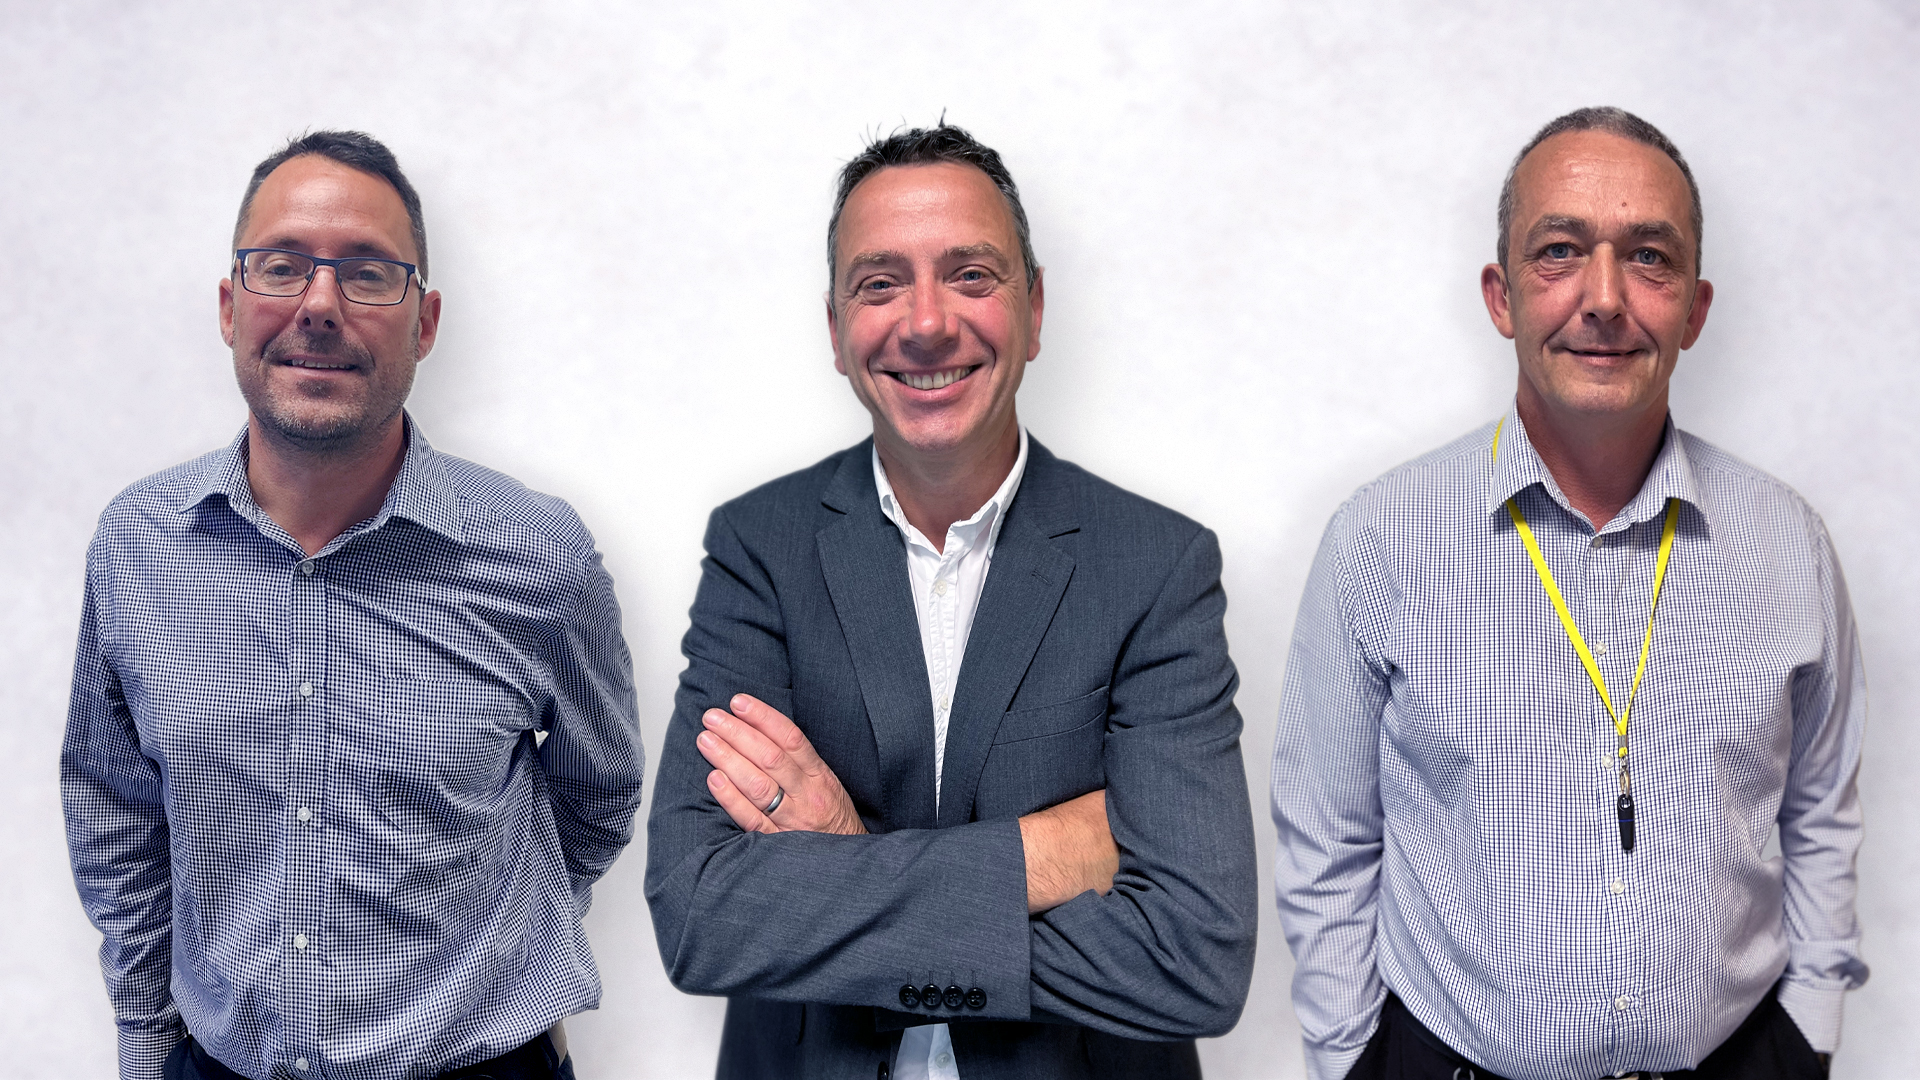 Key Employees Join Hexagon Leasing to Support Growth